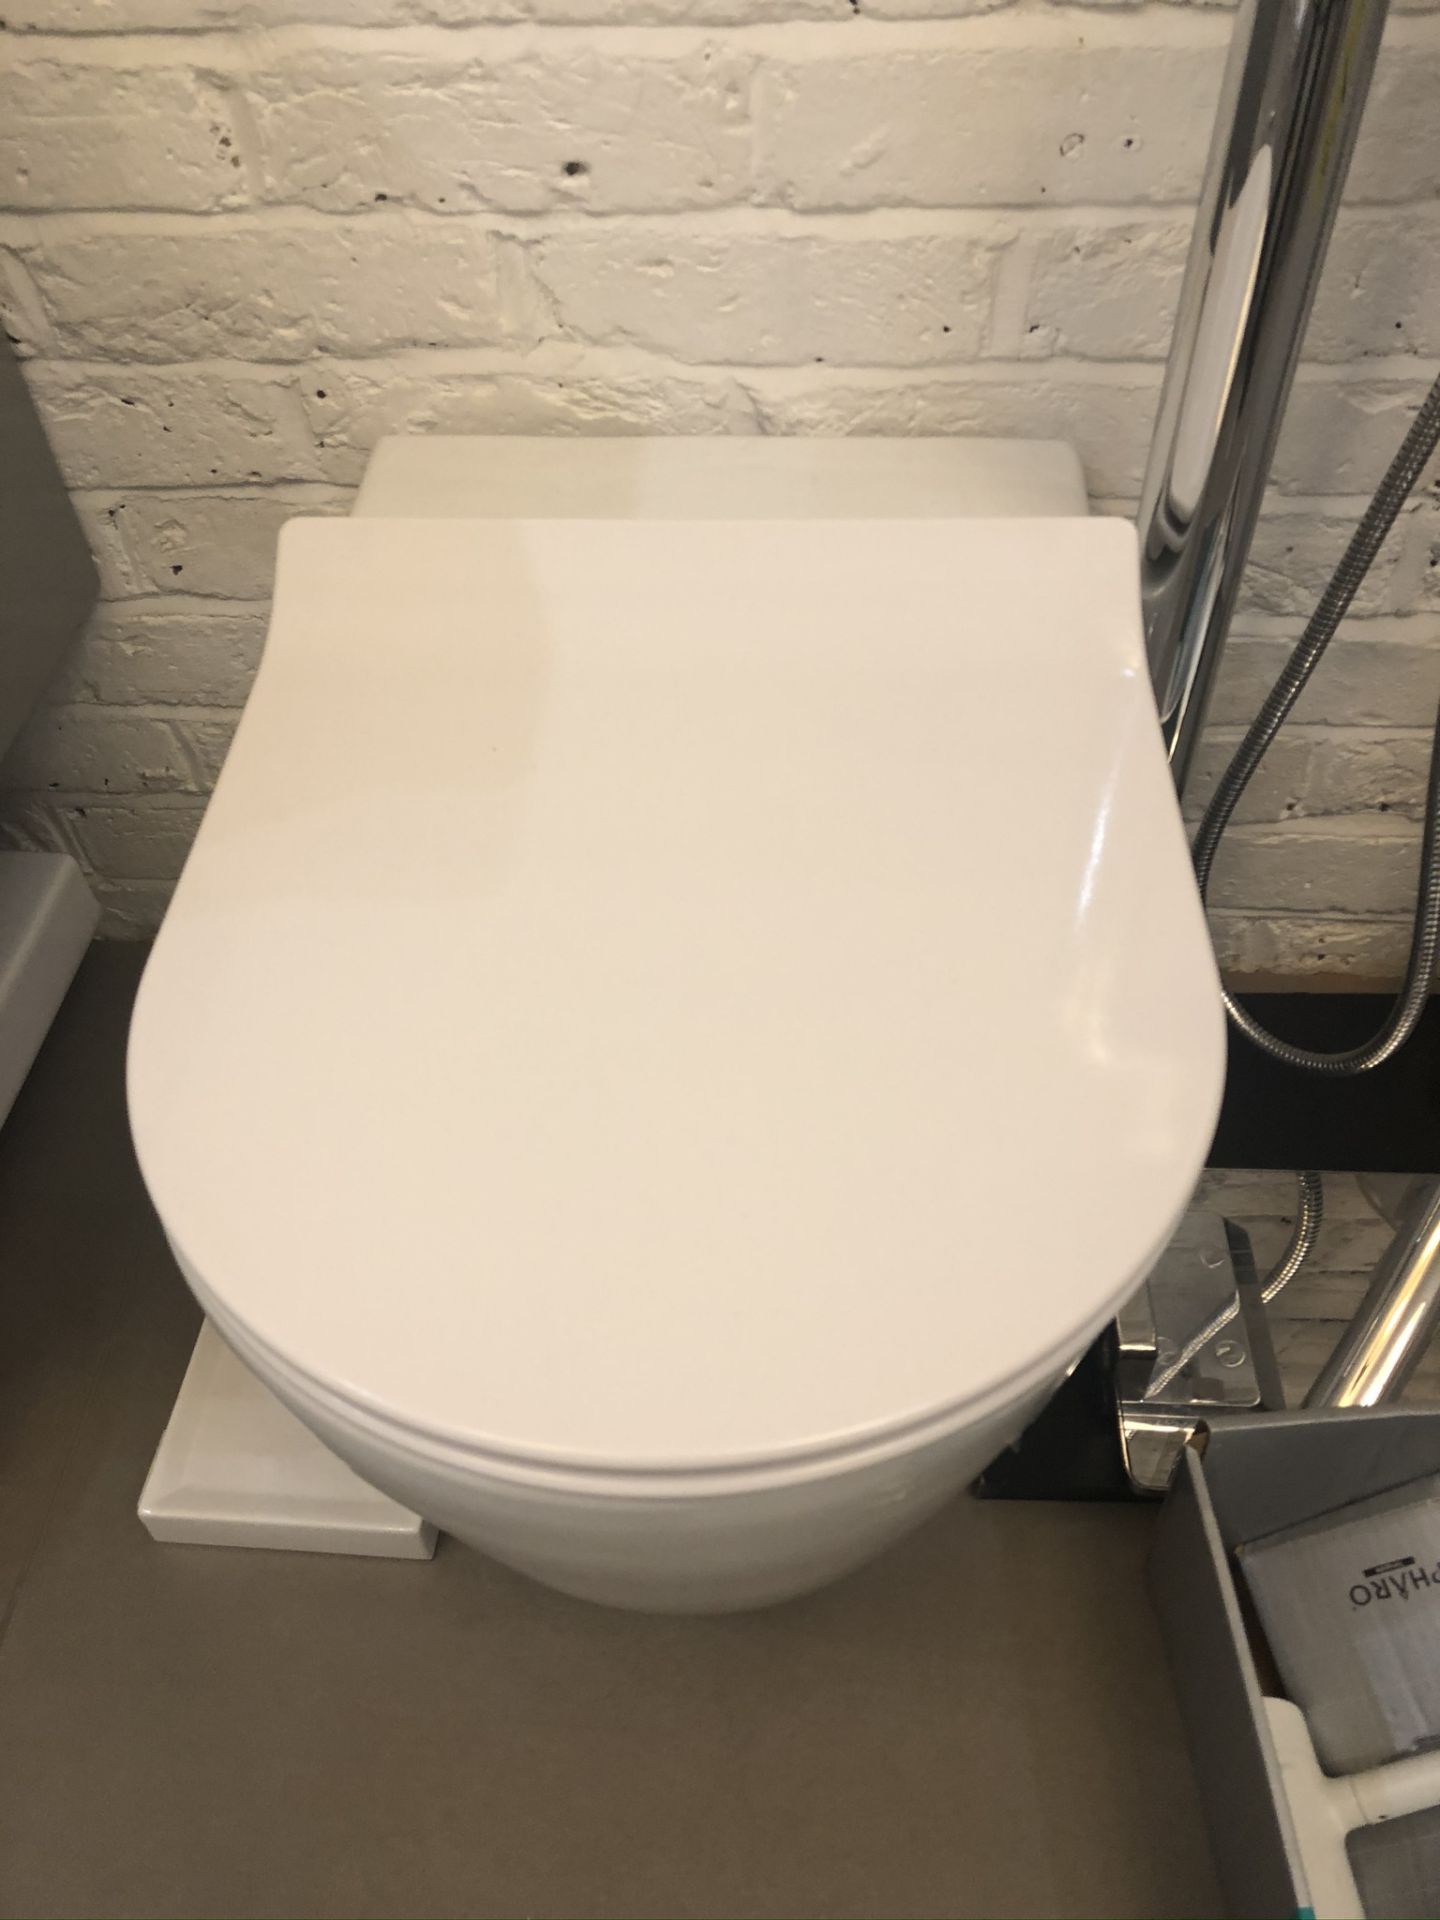 Ex Display Unbranded Soft Close Toilet in White - Image 3 of 3